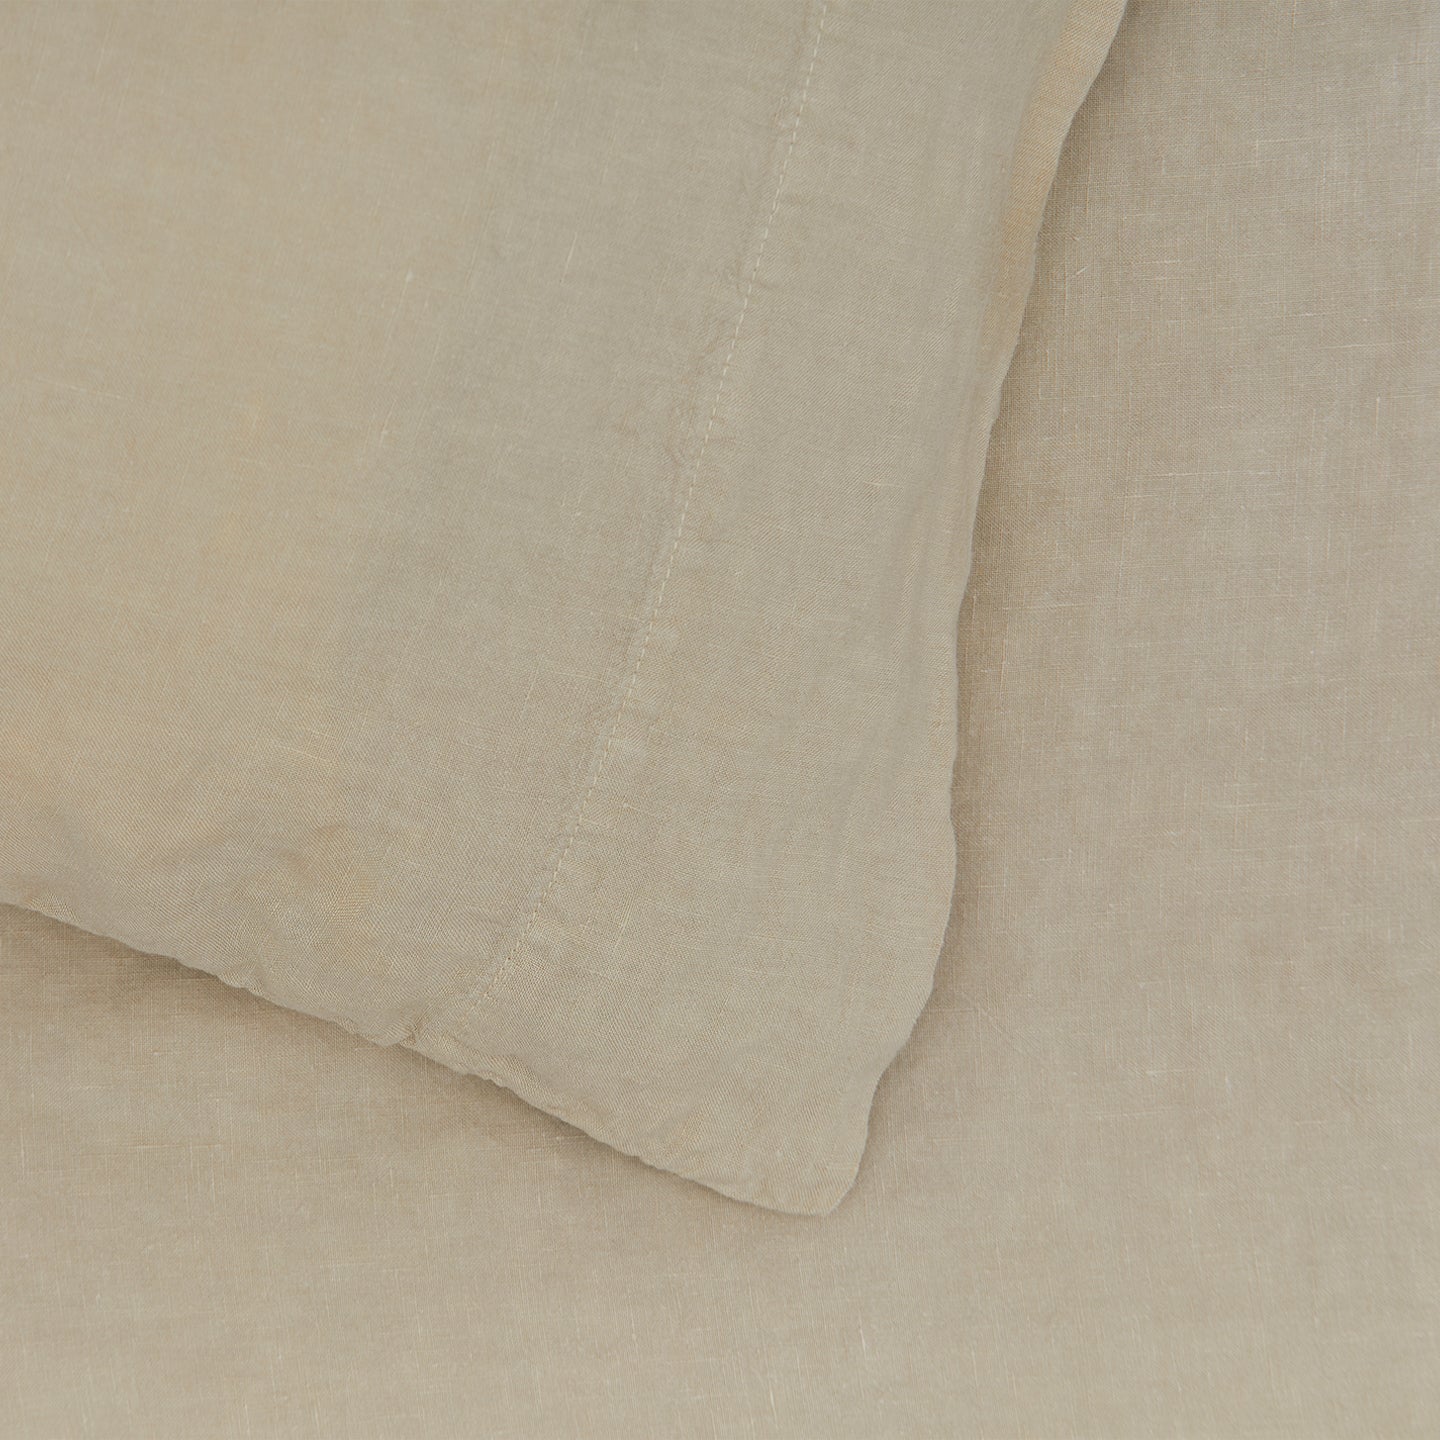 Simple Linen Pillowcases, Set of 2 - Flax